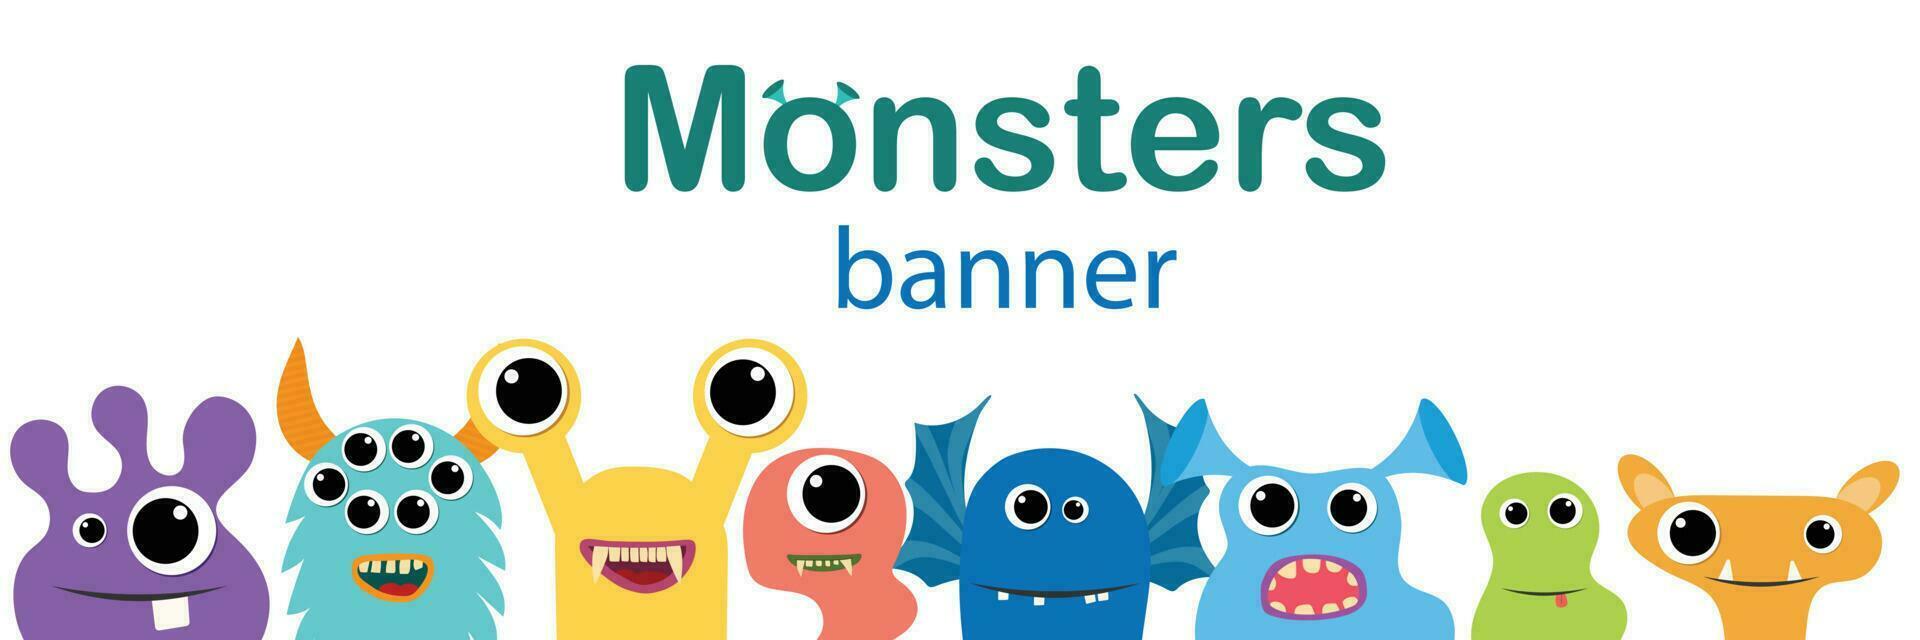 Monster's banner with peep out monsters. Vector illustration.